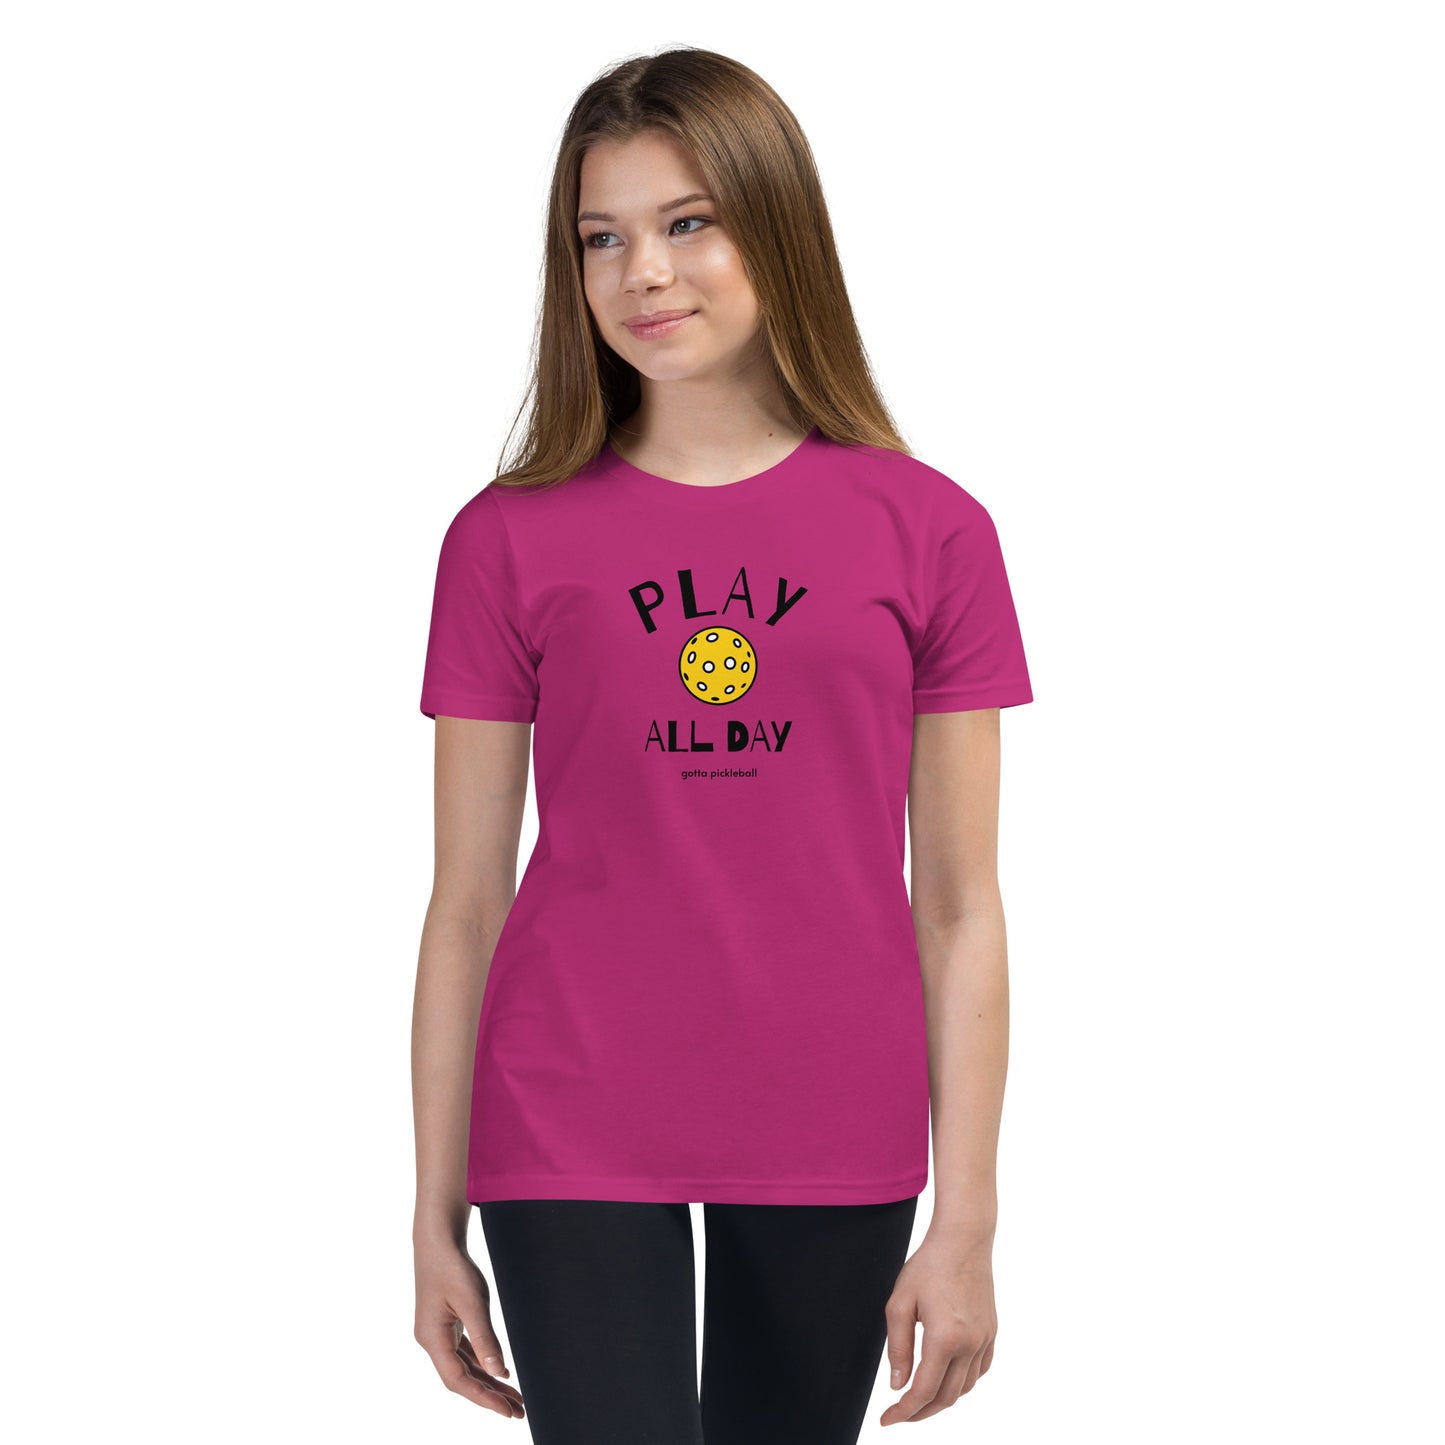 Youth T-Shirt: Play All Day with Pickleball (more colors)